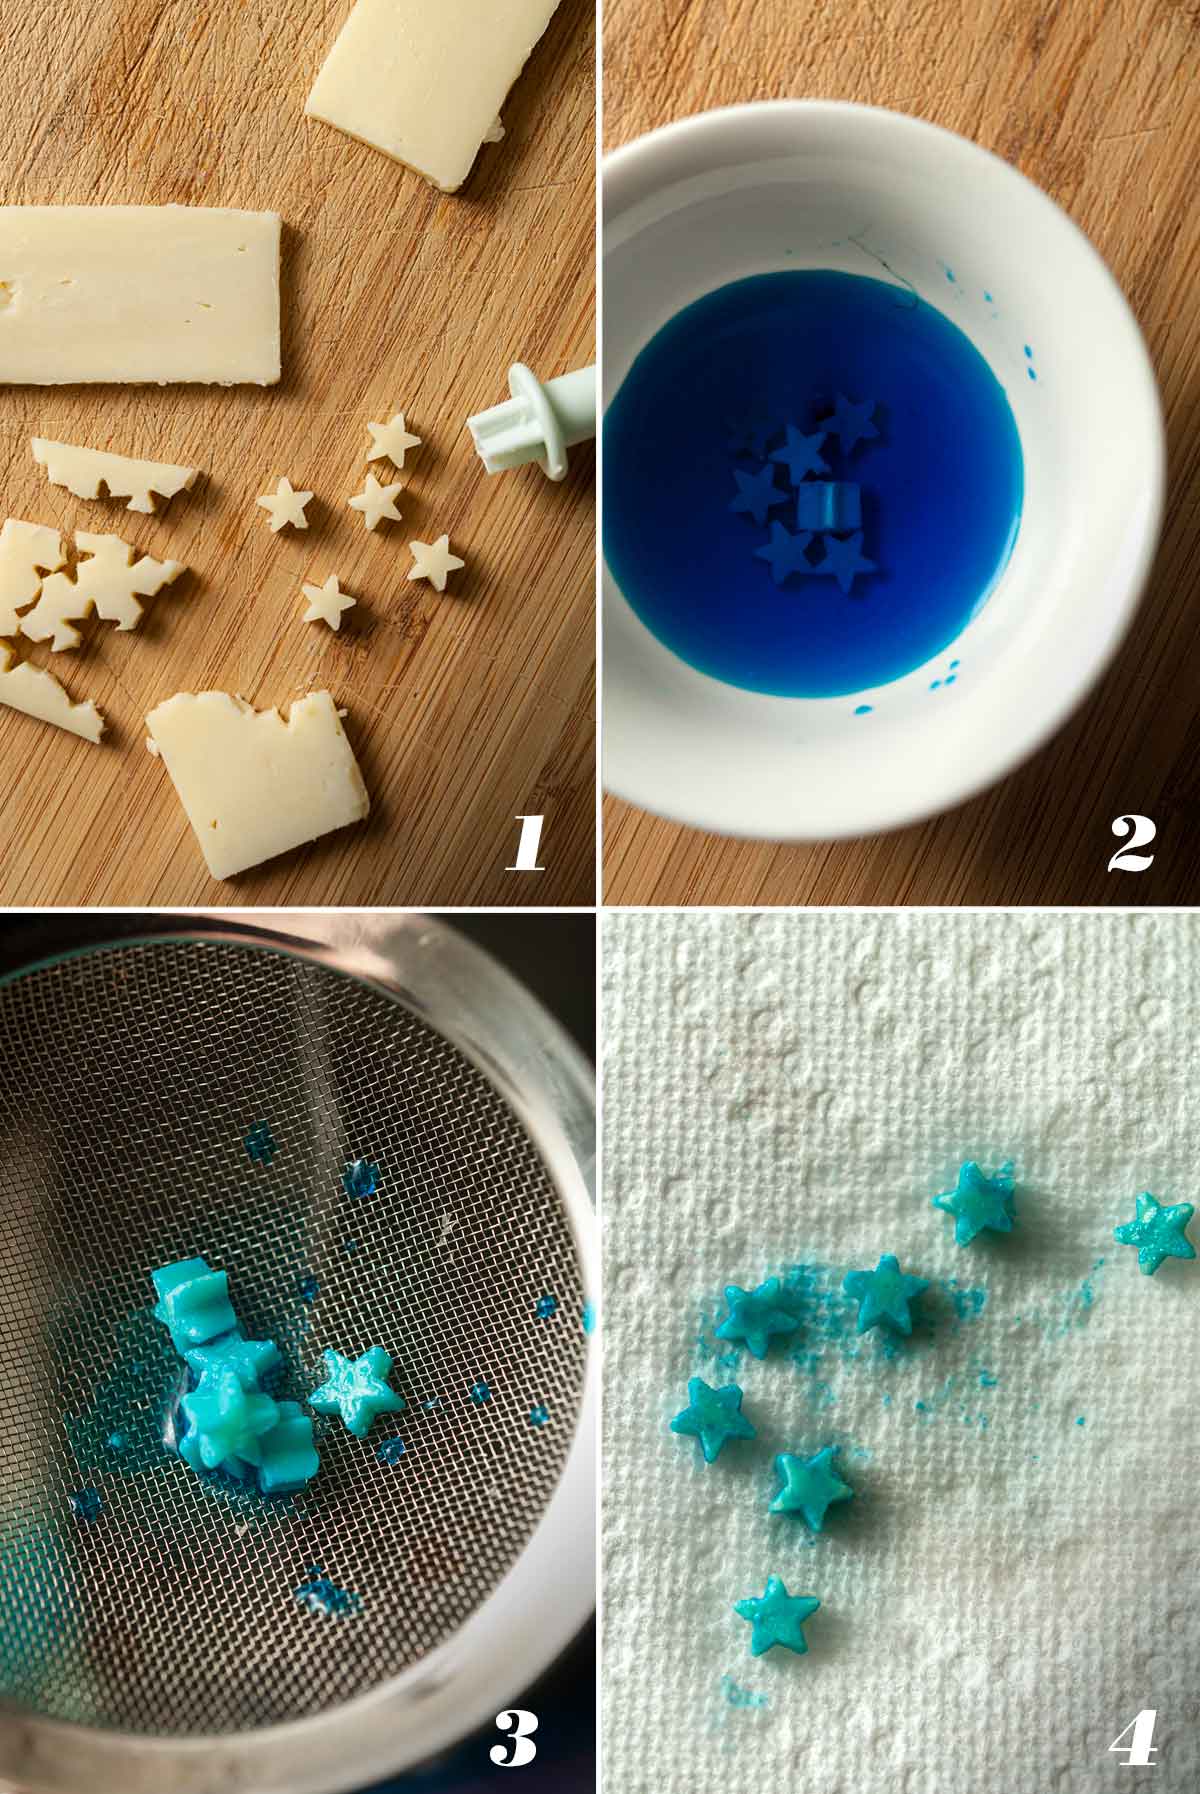 A collage of 4 numbered images showing how to create blue cheese stars.